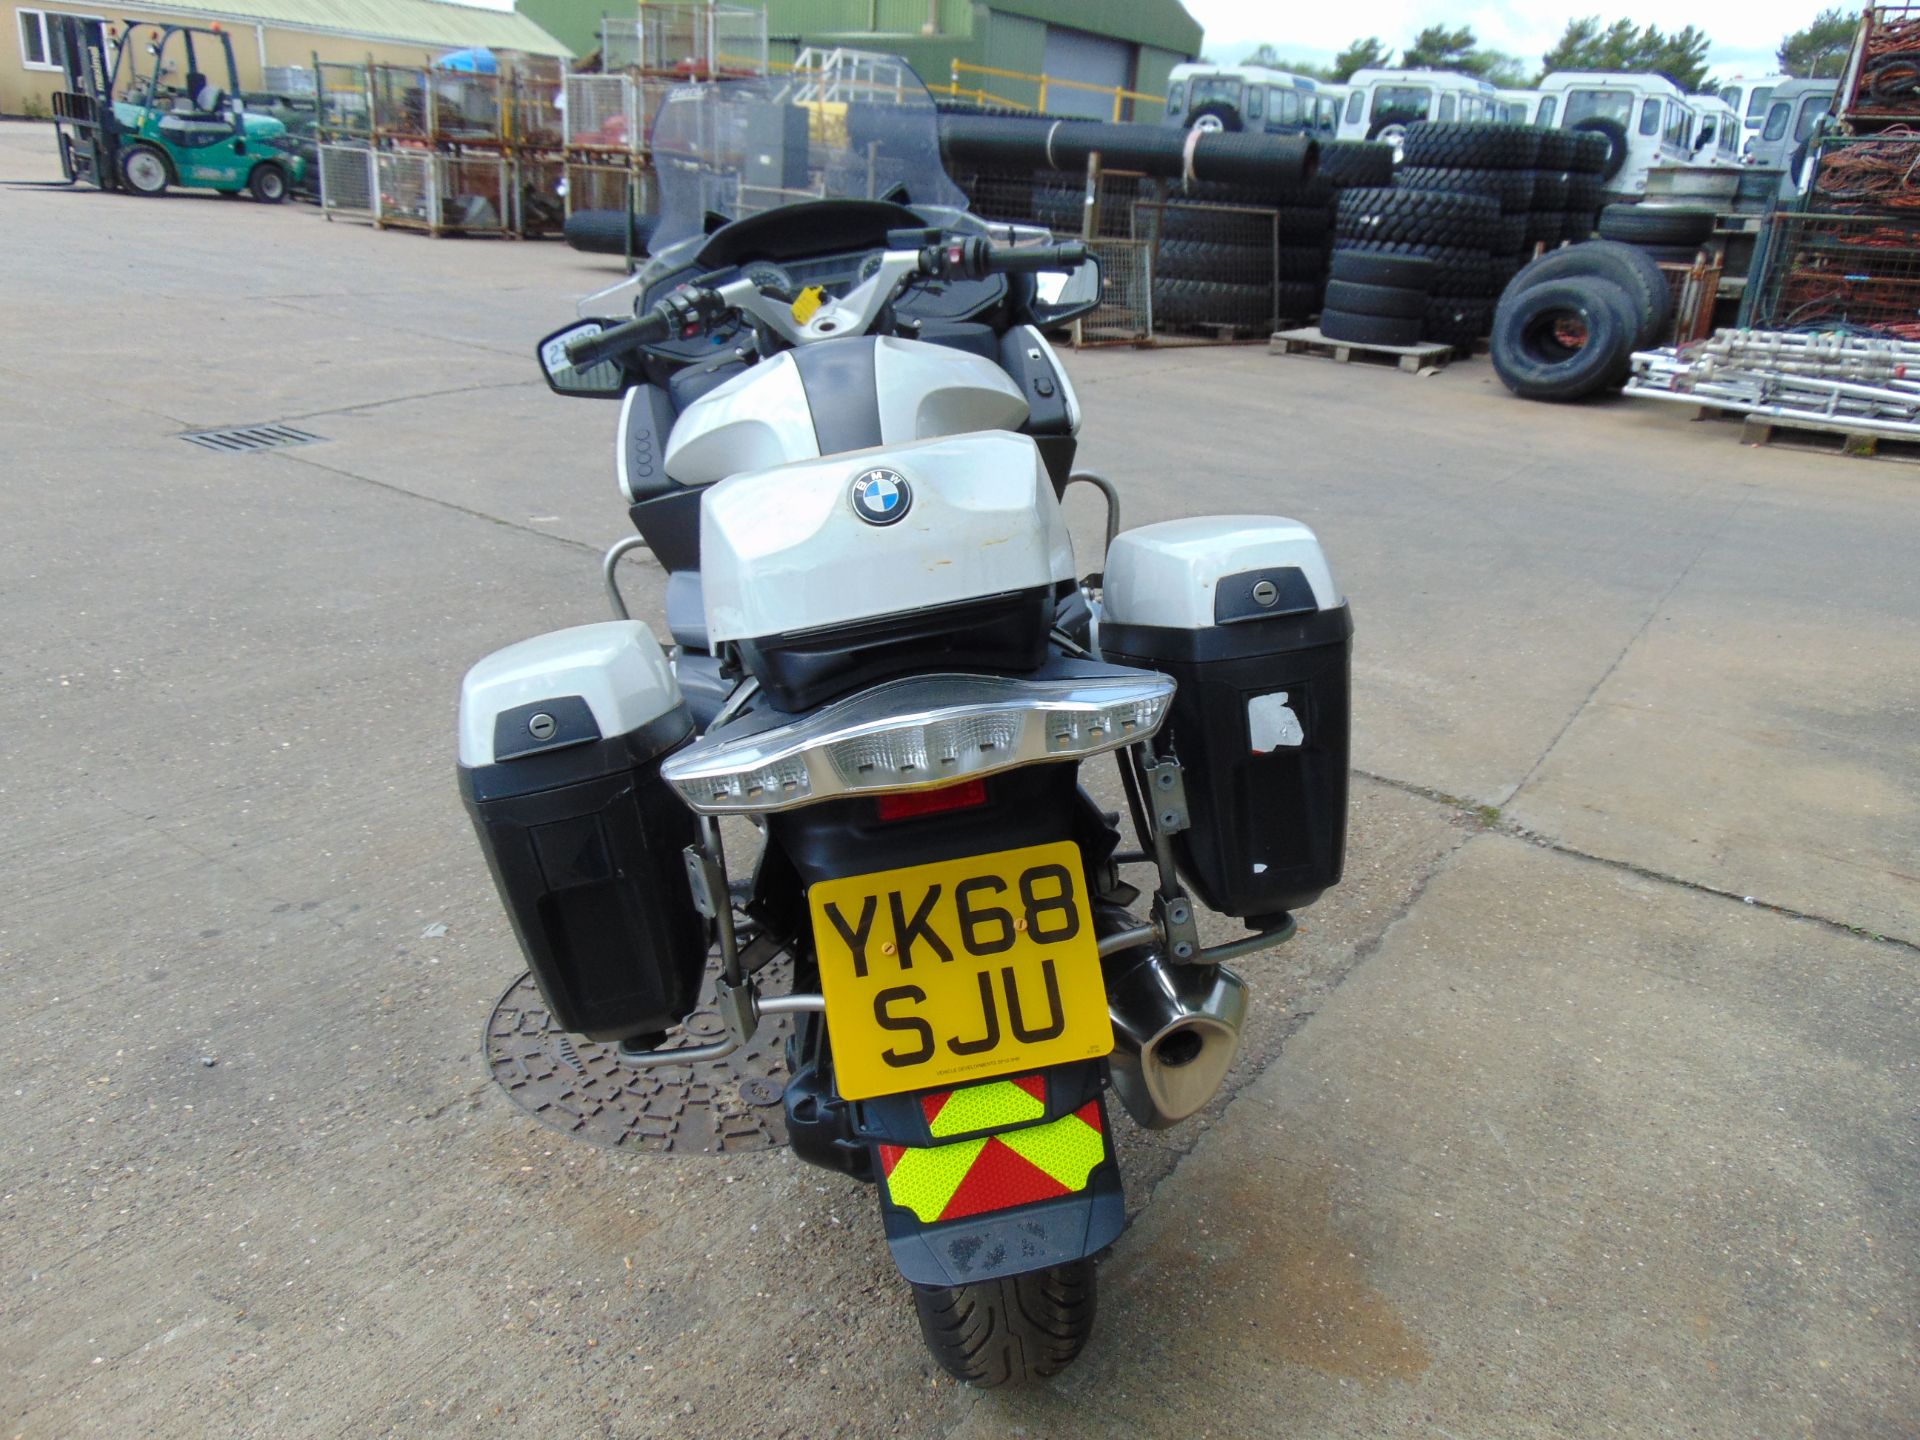 UK Police a 1 Owner 2019 BMW R1200RT Motorbike - Image 8 of 20